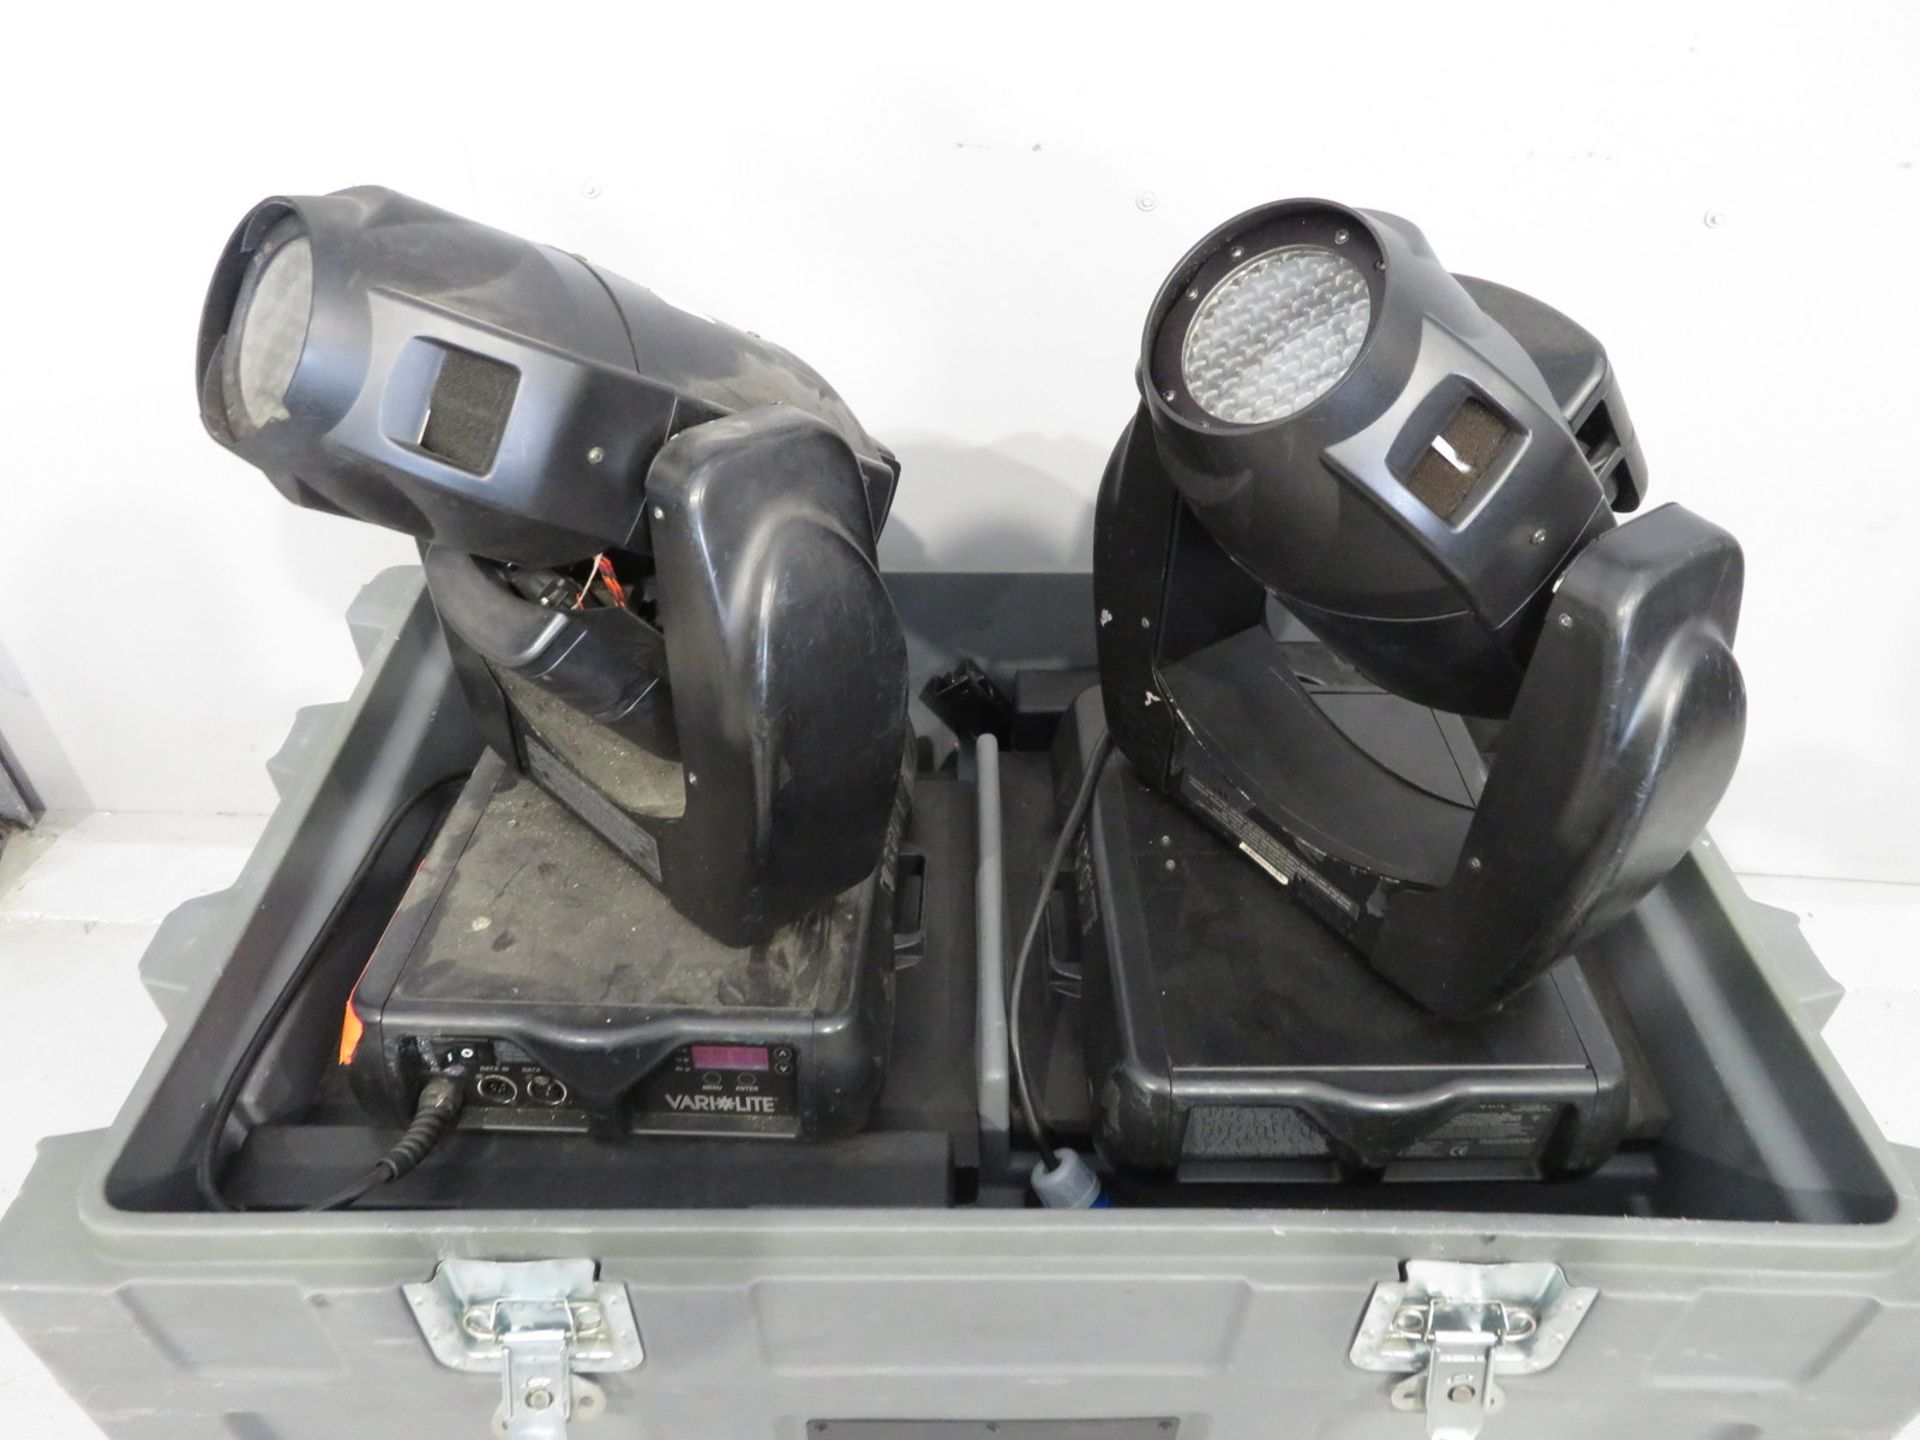 Pair of Varilite VL2402 Wash in flightcase. Includes hanging clamps and safety bonds. 1 Wo - Image 2 of 10